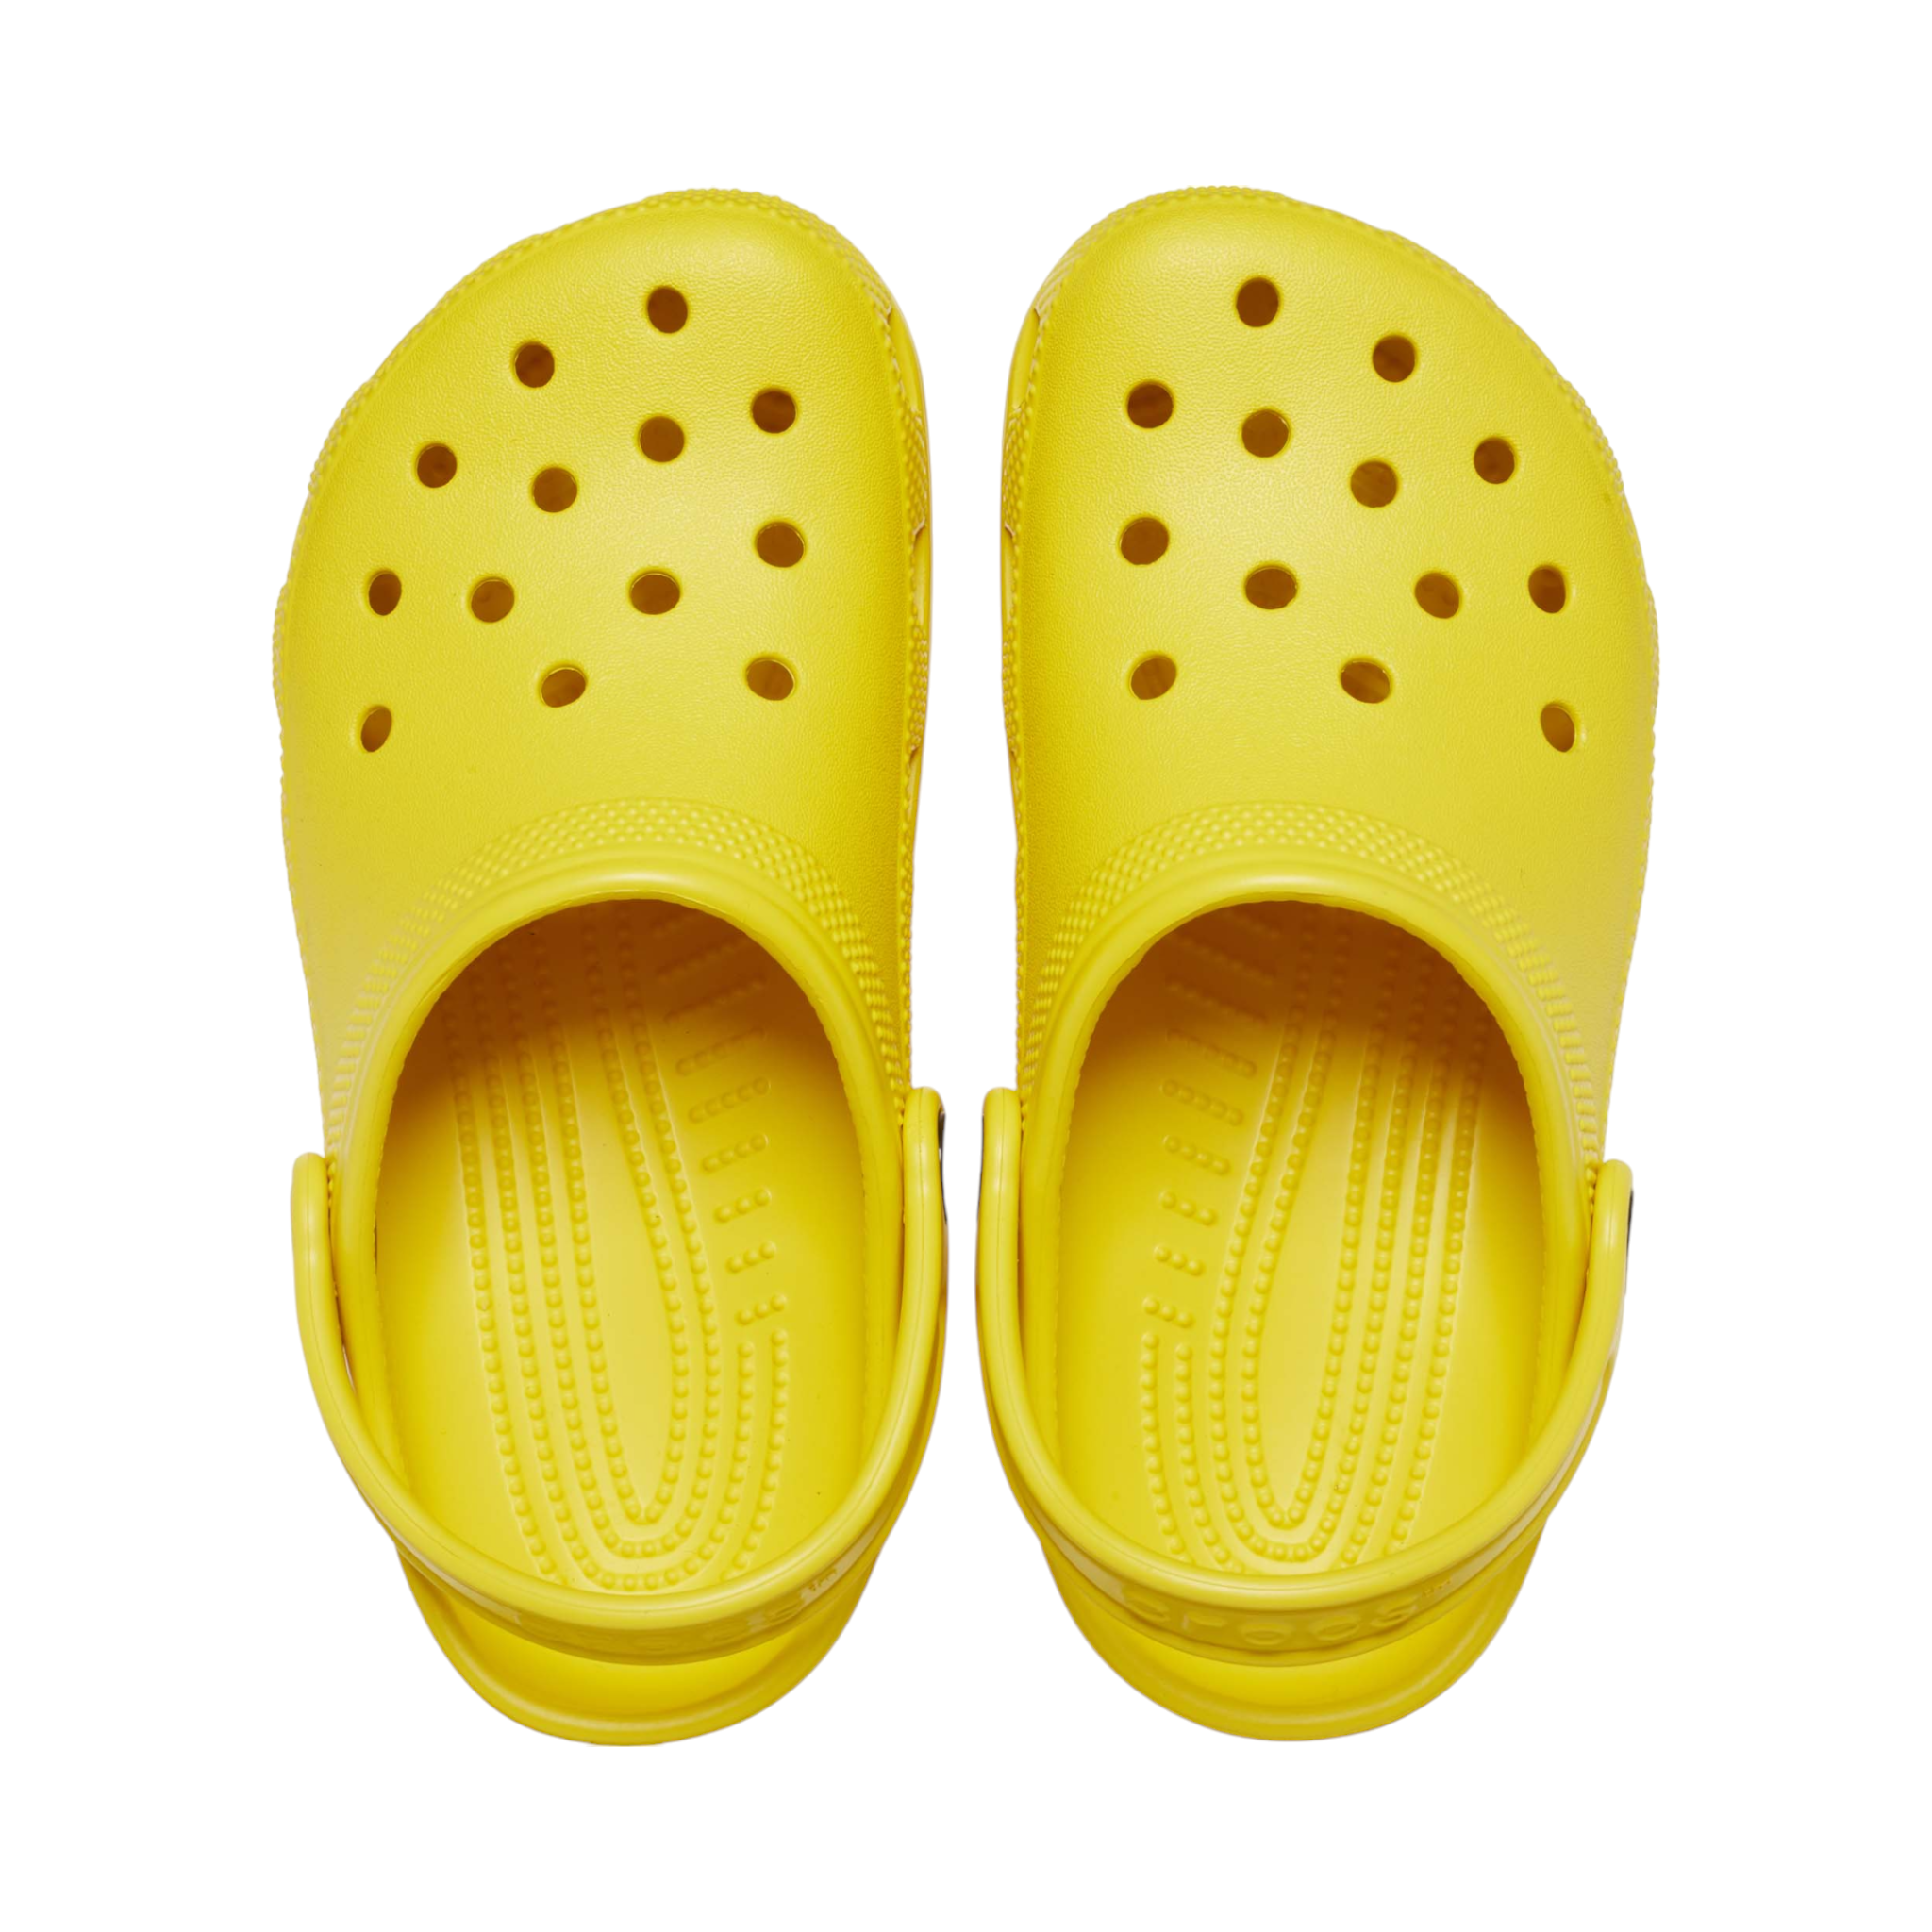 Crocs Classic Clogs online and instore with shoe&amp;me Mount Maunganui. Shop sunflower Clogs